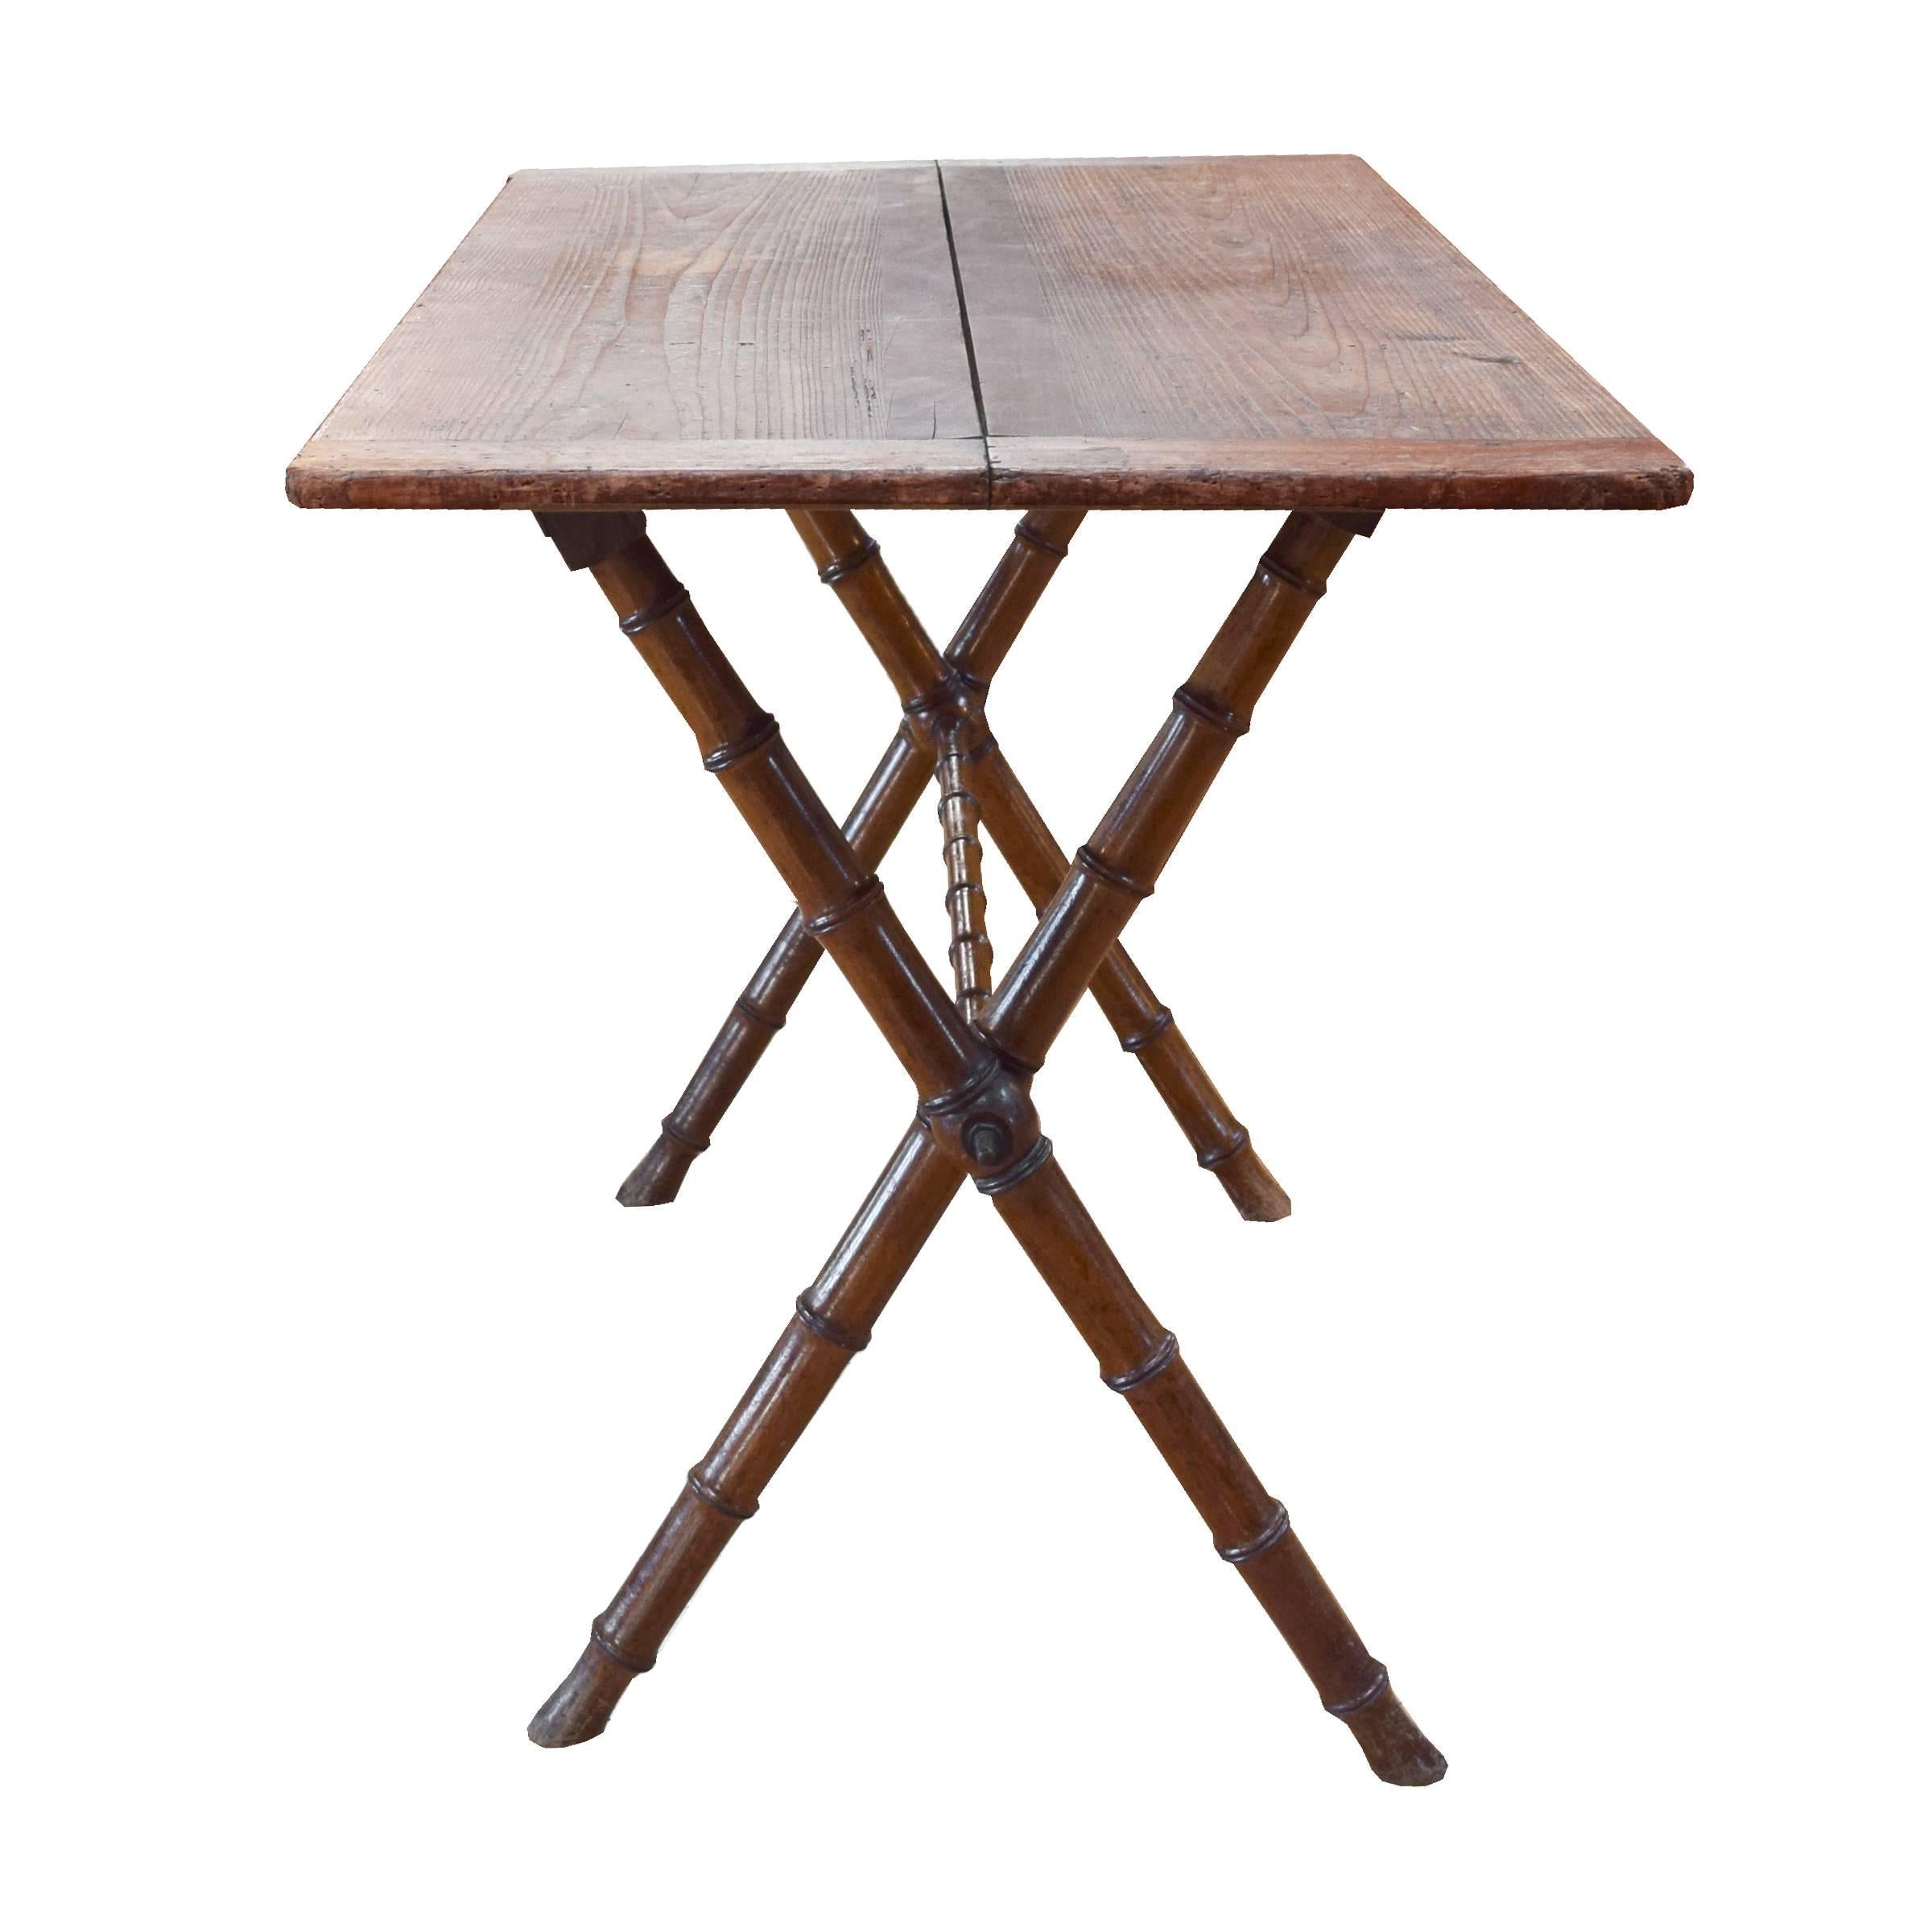 European French Folding Table with Faux Bamboo Legs